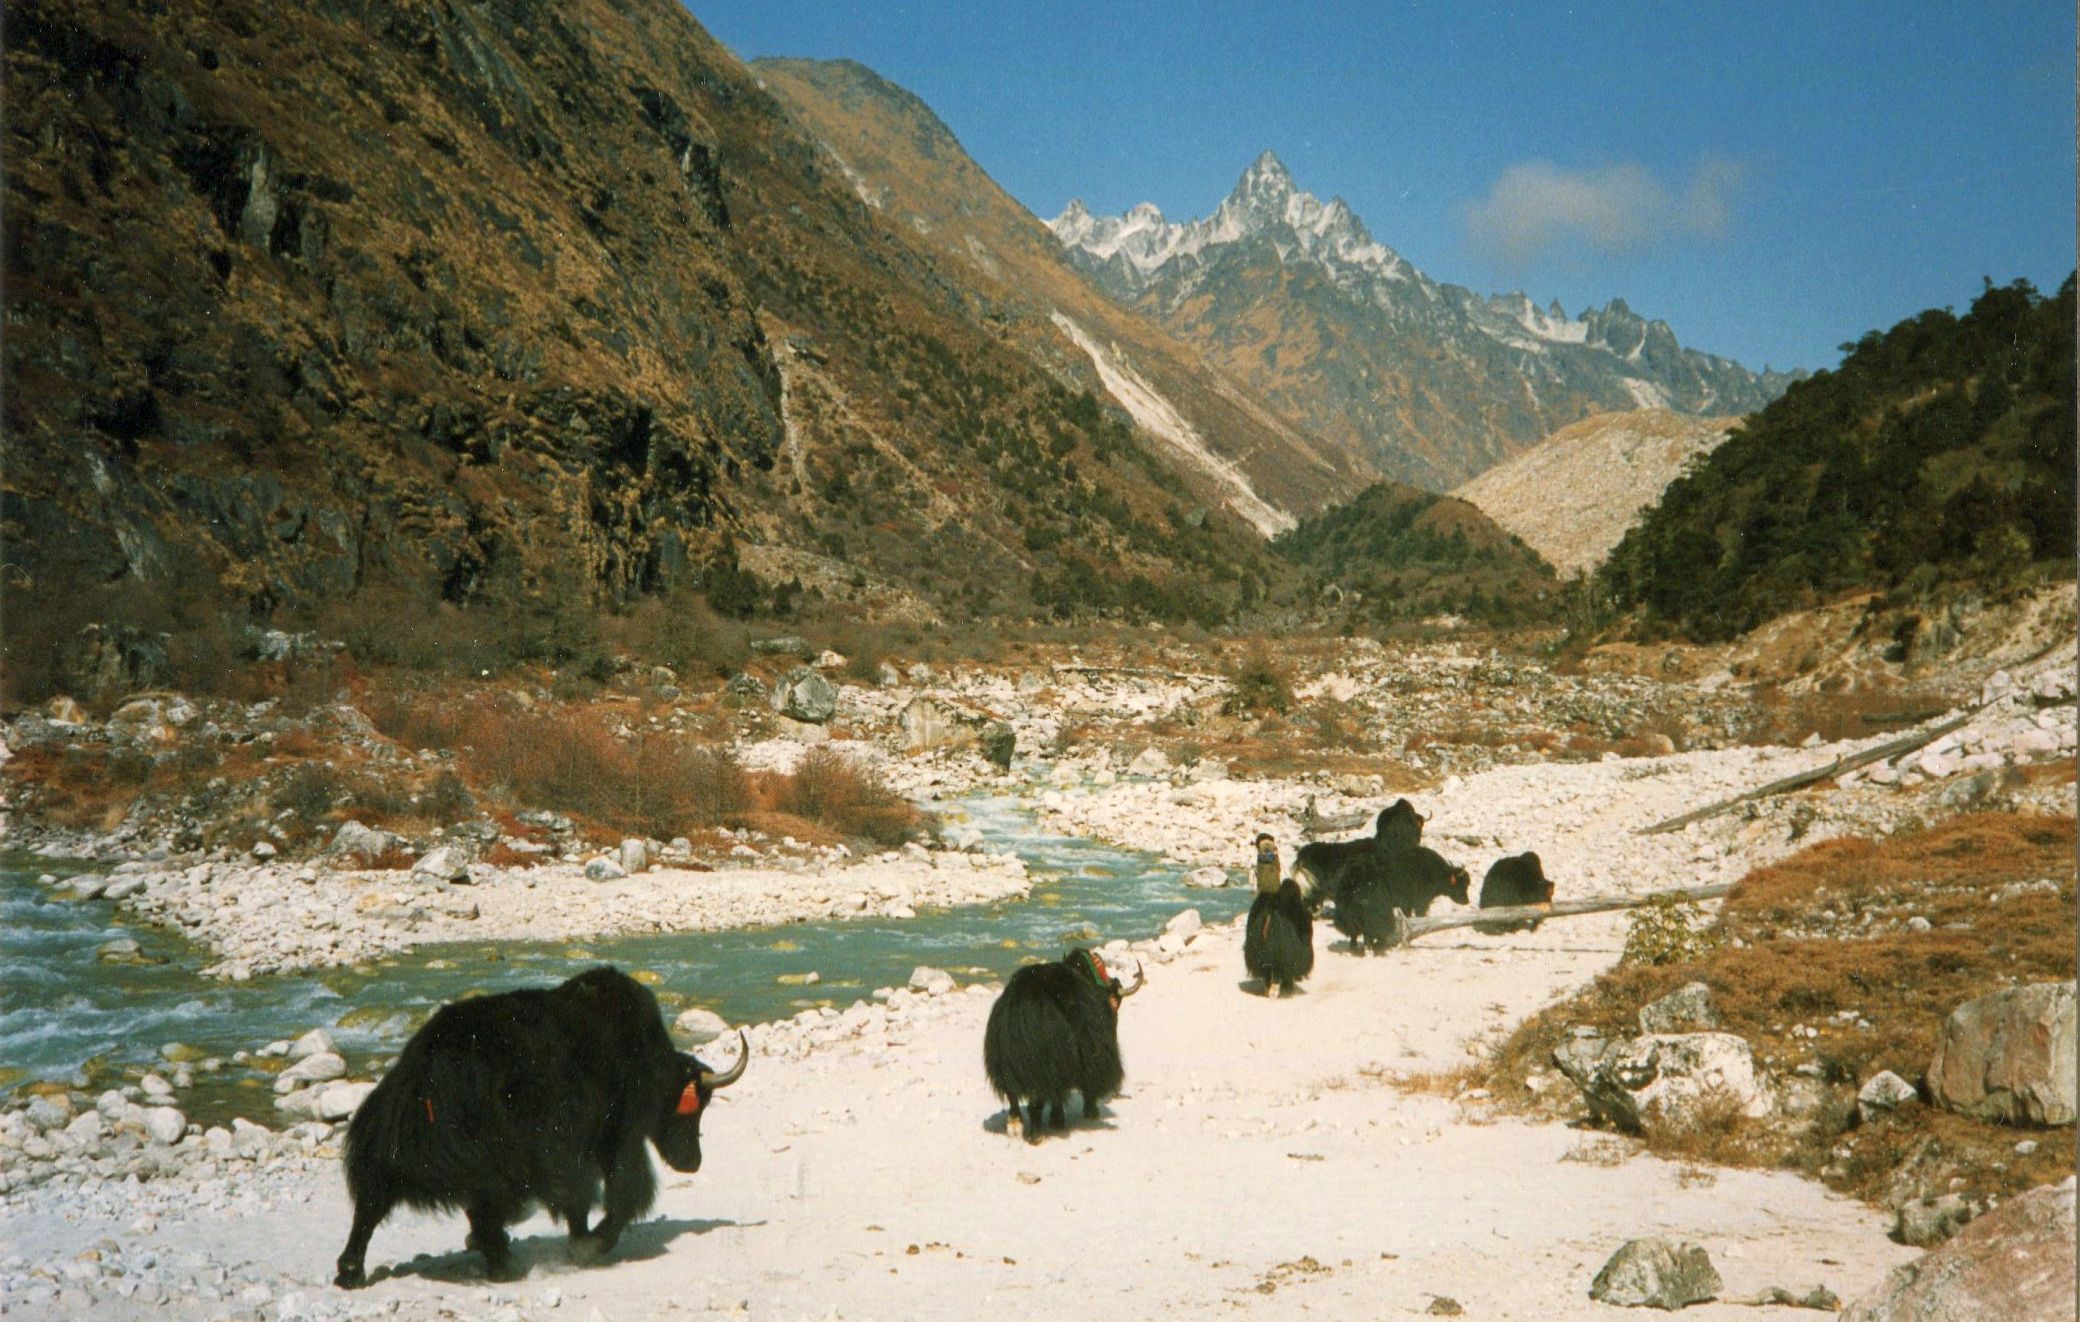 Yaks in Upper Ghunsa Khola Valley on route to Lhonak